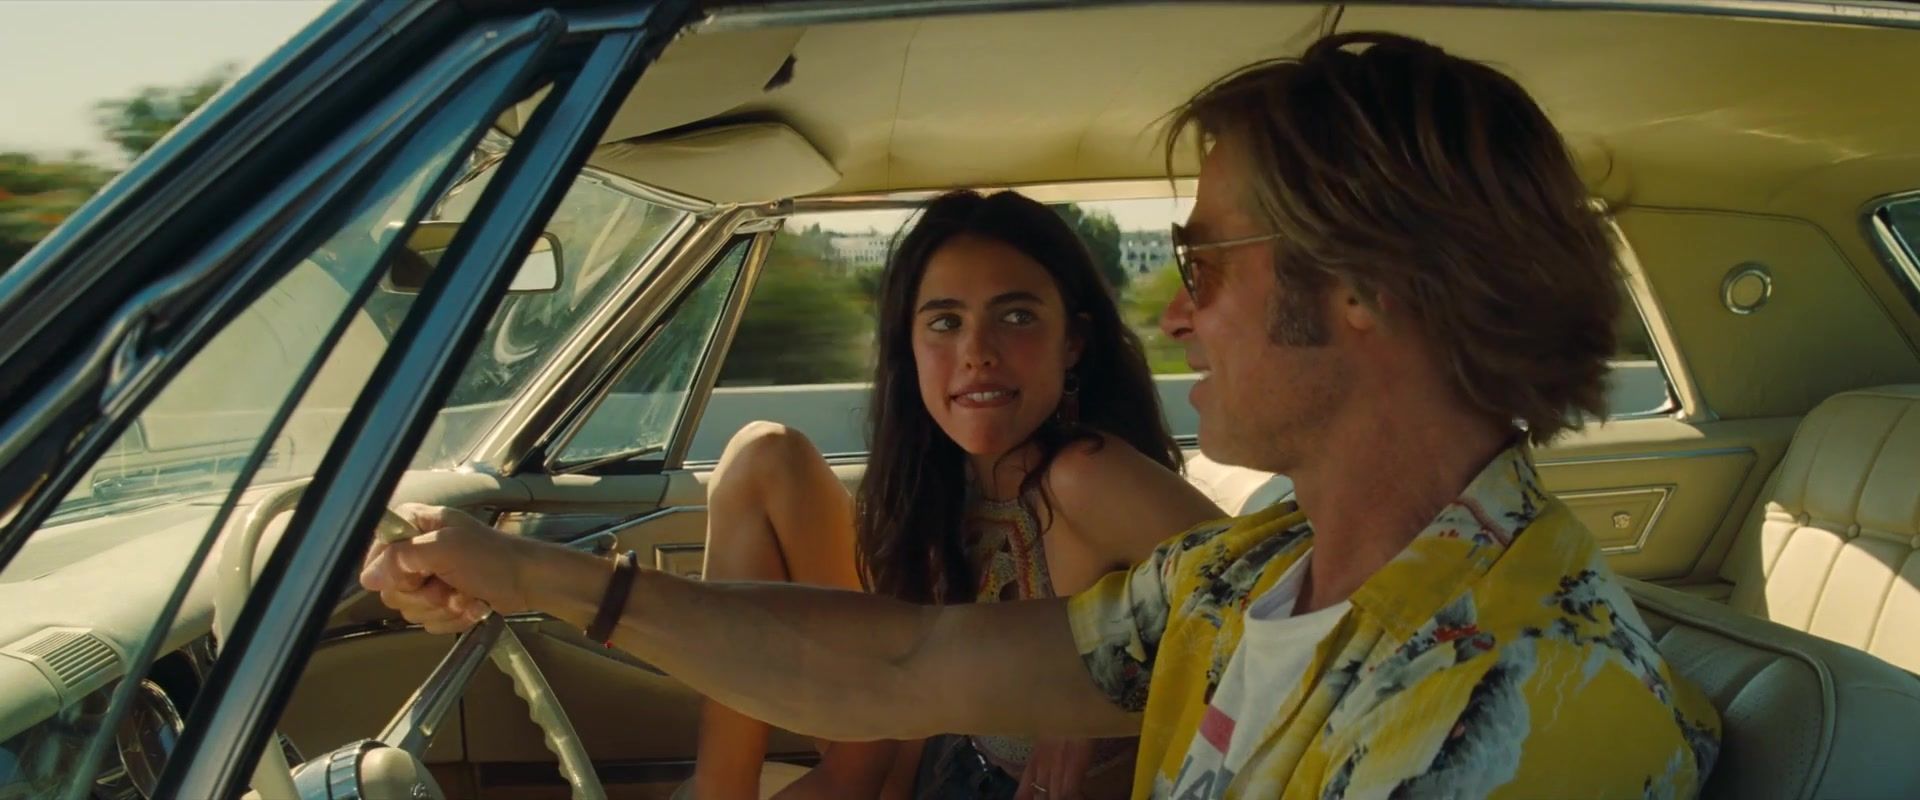 Huge Ass Sexy Dakota Fanning, Margaret Qualley naked- Once Upon A Time In Hollywood (2019) Huge Tits - 2